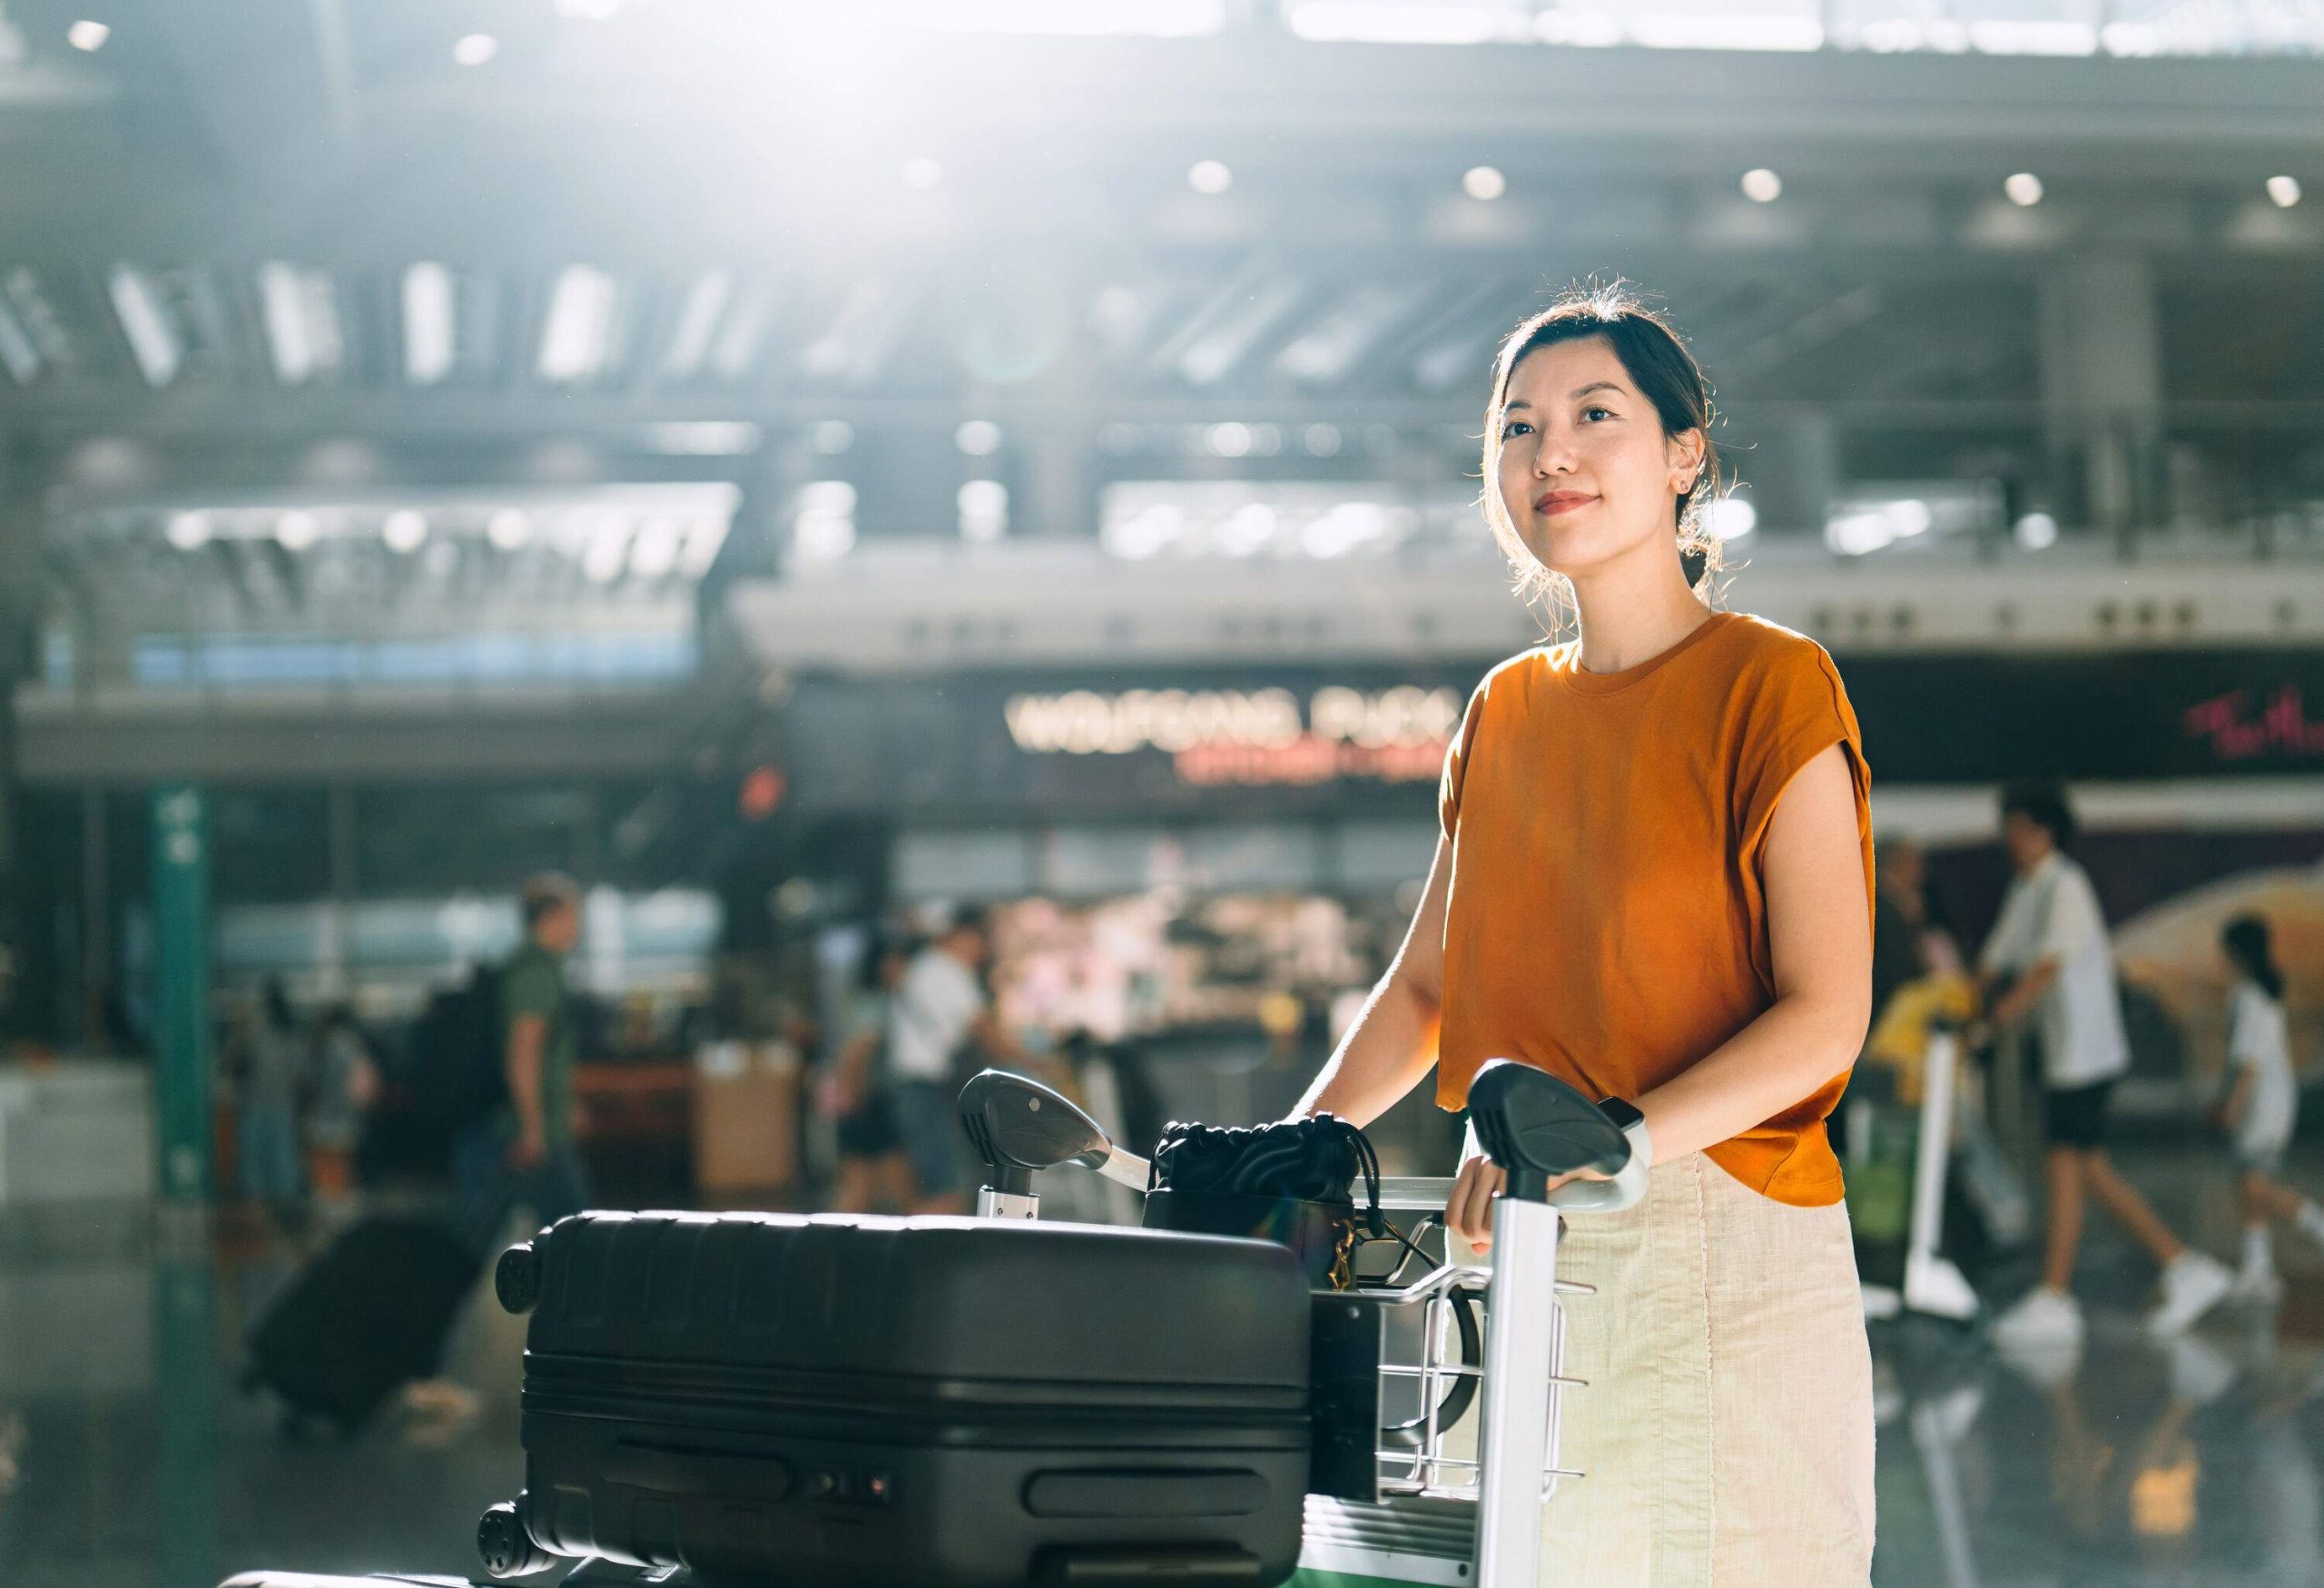 Young Asian woman pushing a luggage trolley with suitcases to the check-in counter at airport terminal. Ready for a trip. Business travel. Travel and vacation concept